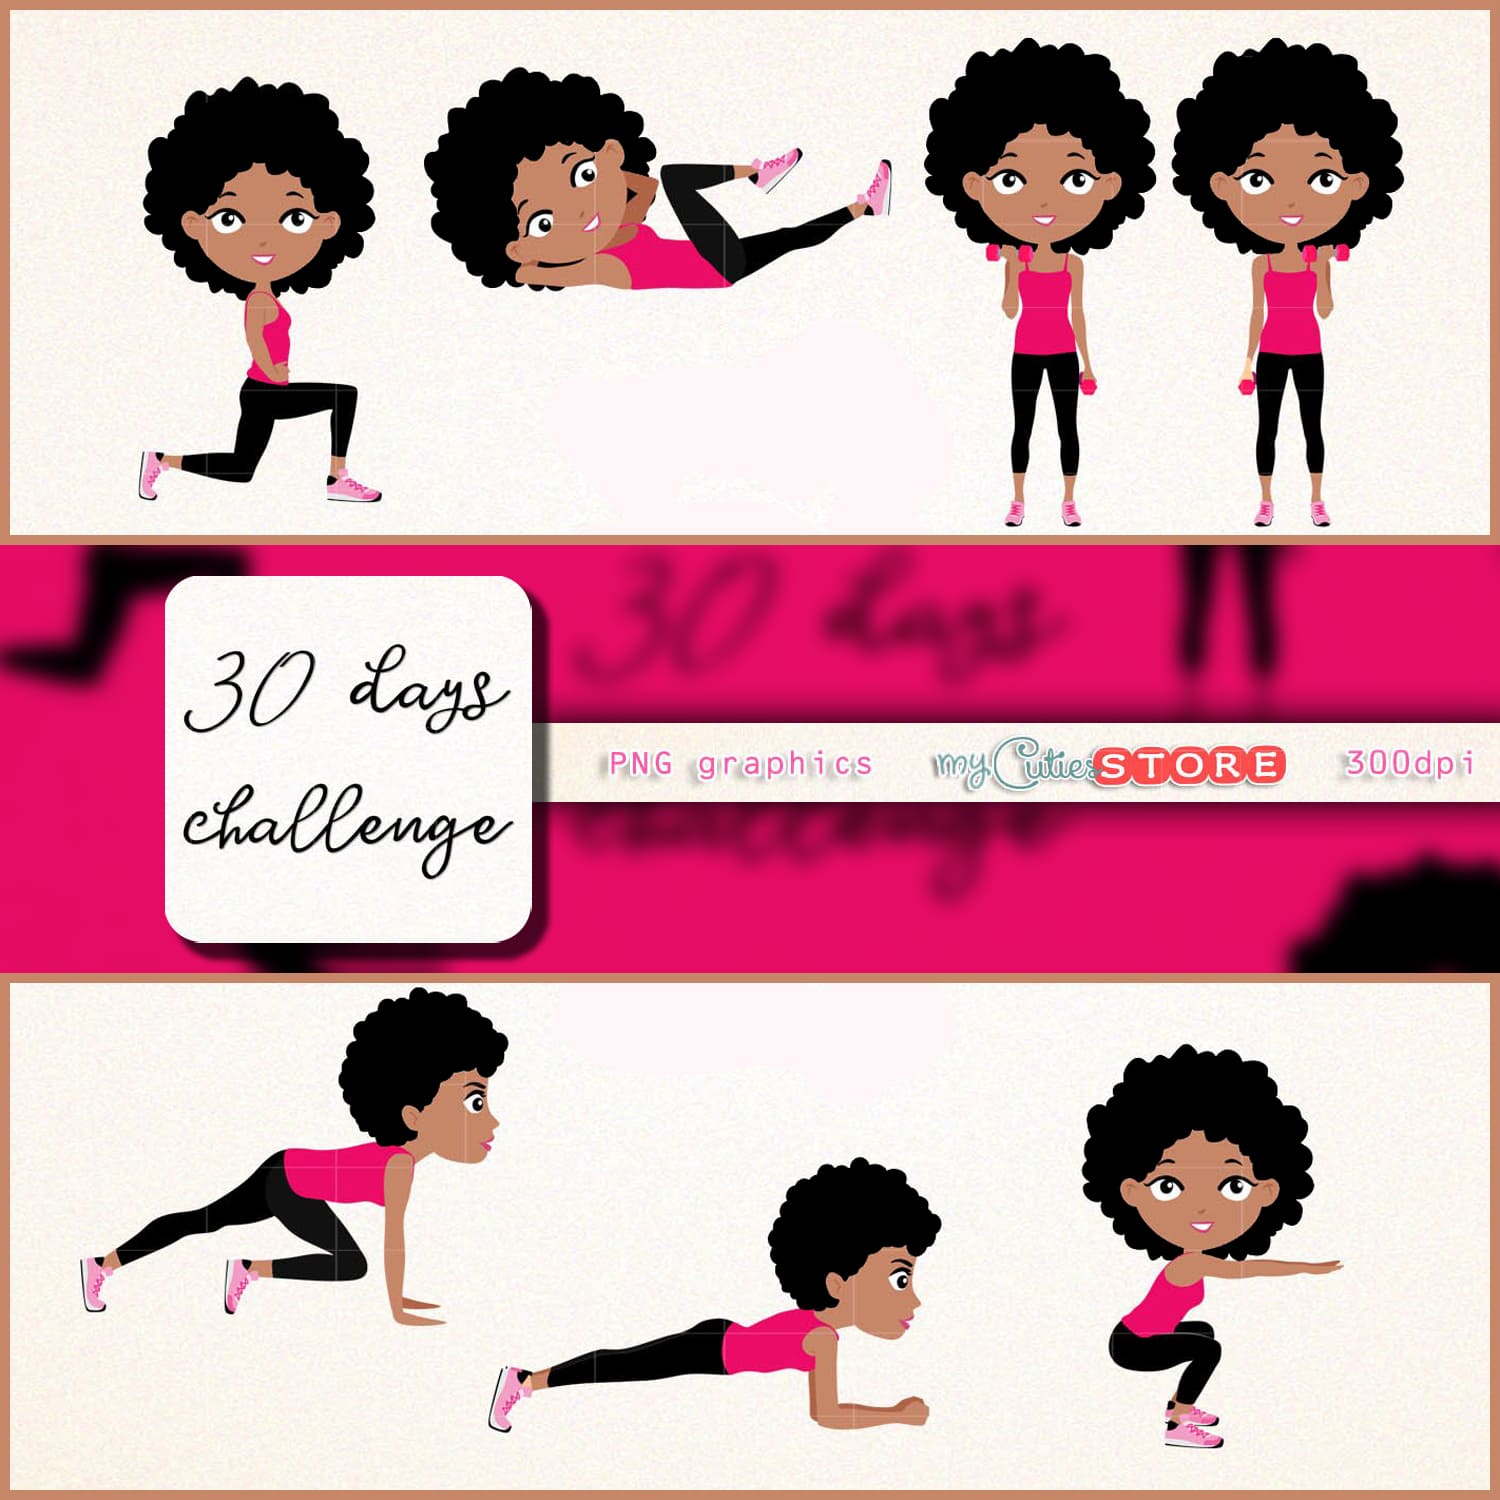 Core afro girl fitness workout.